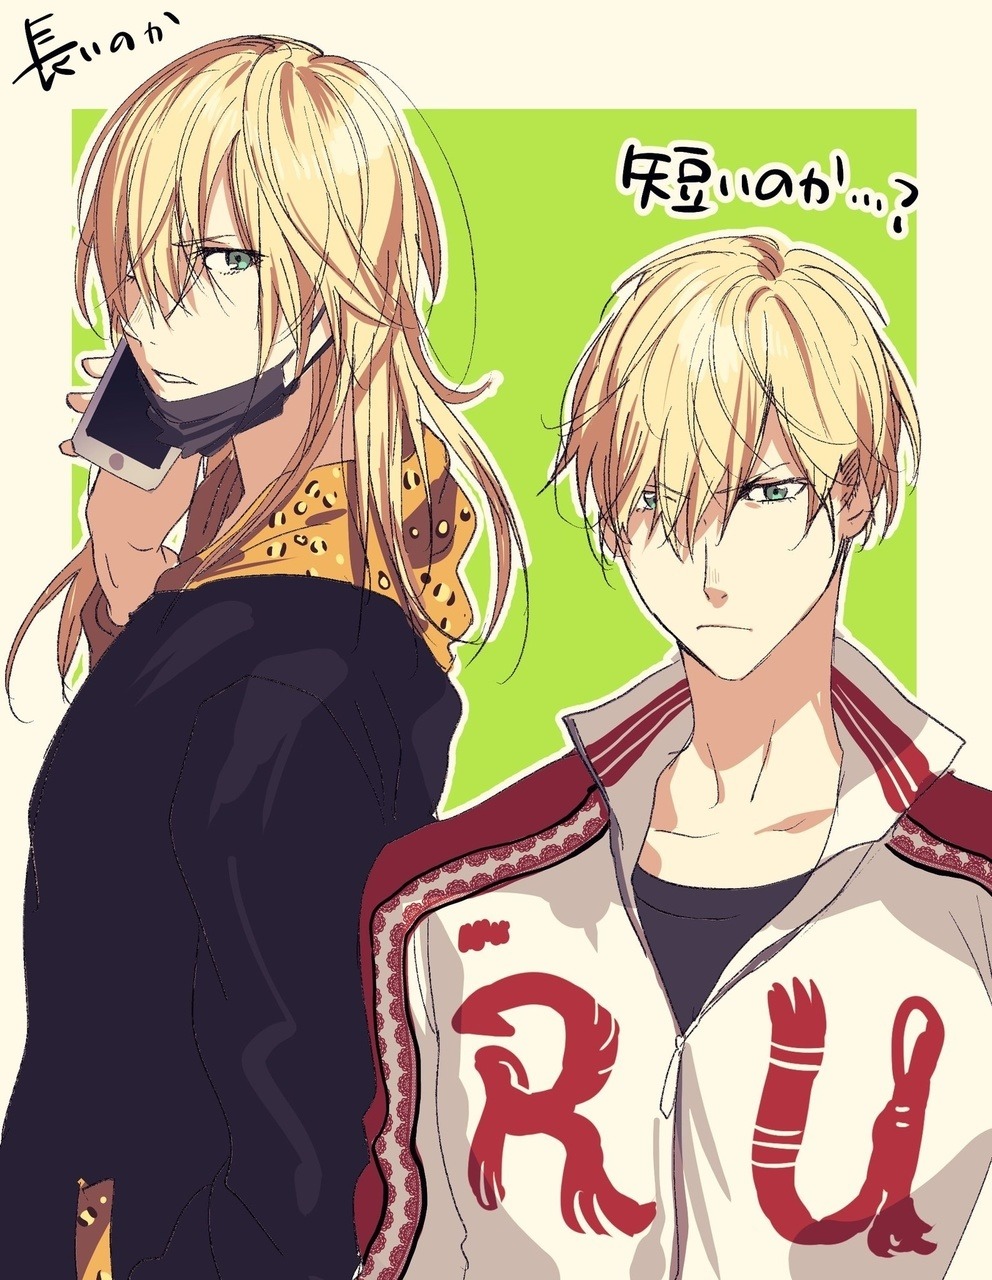 Yurio a We Heart It-on - http://weheartit.com/entry/268028449